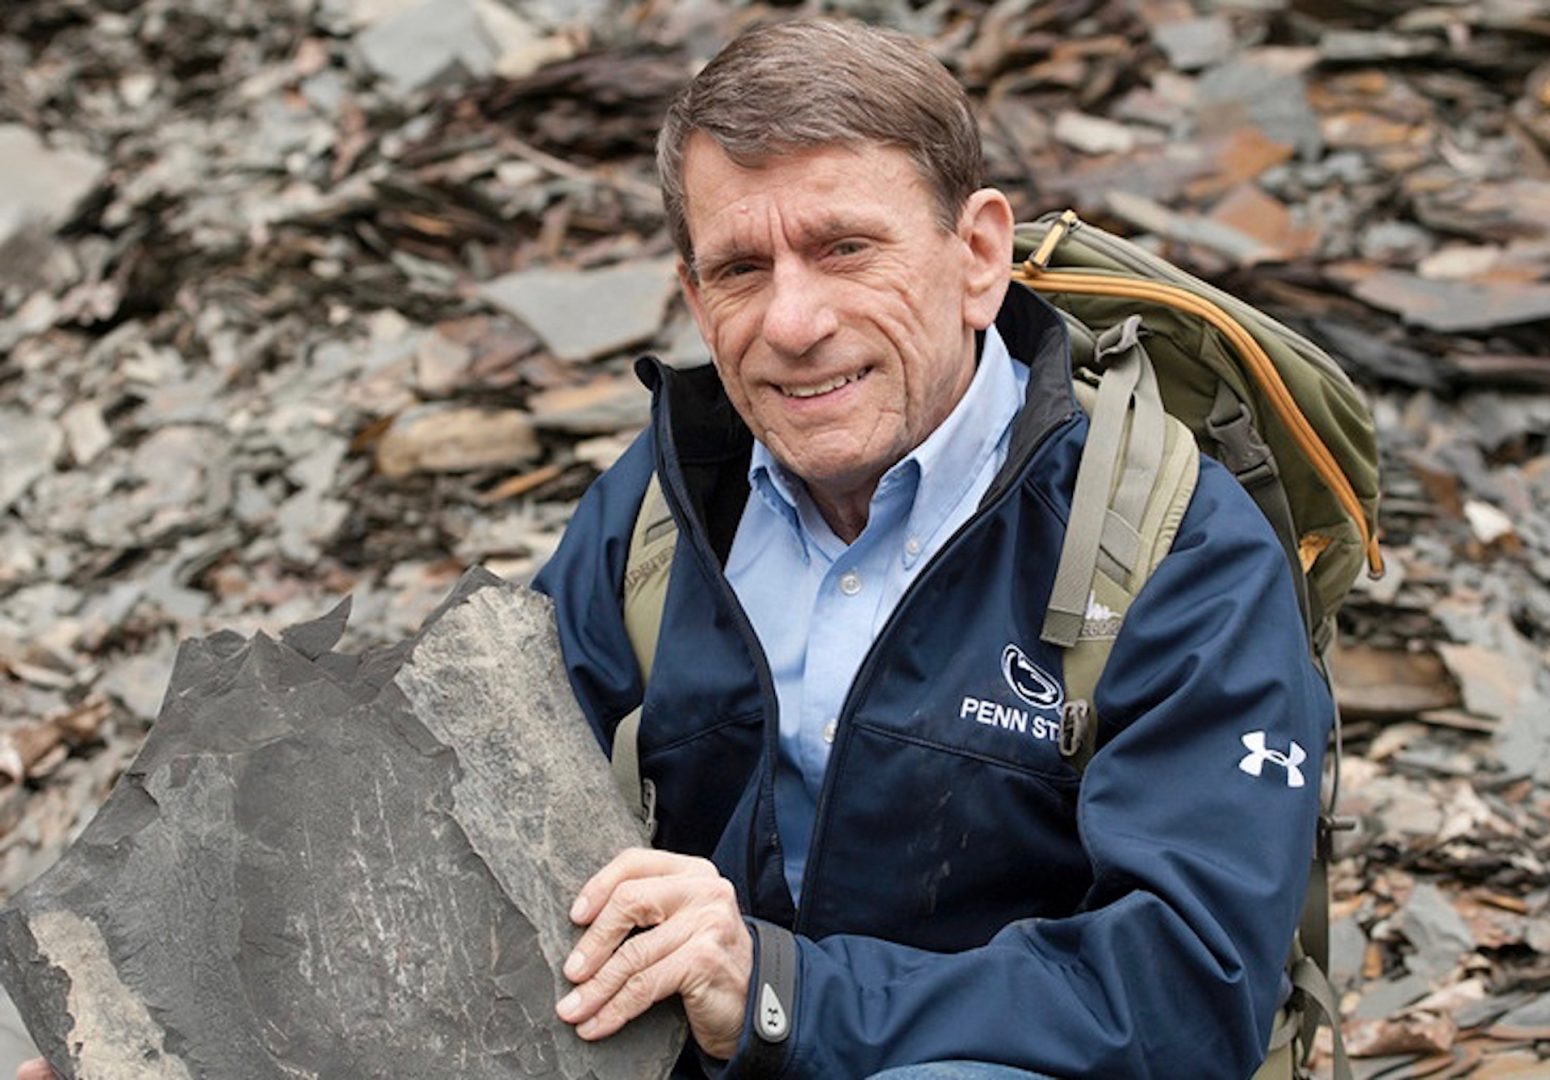 Terry Engelder, professor emeritus of geosciences at Penn State, calculated how much natural gas could be tapped into using unconventional drilling in the Marcellus Shale region.